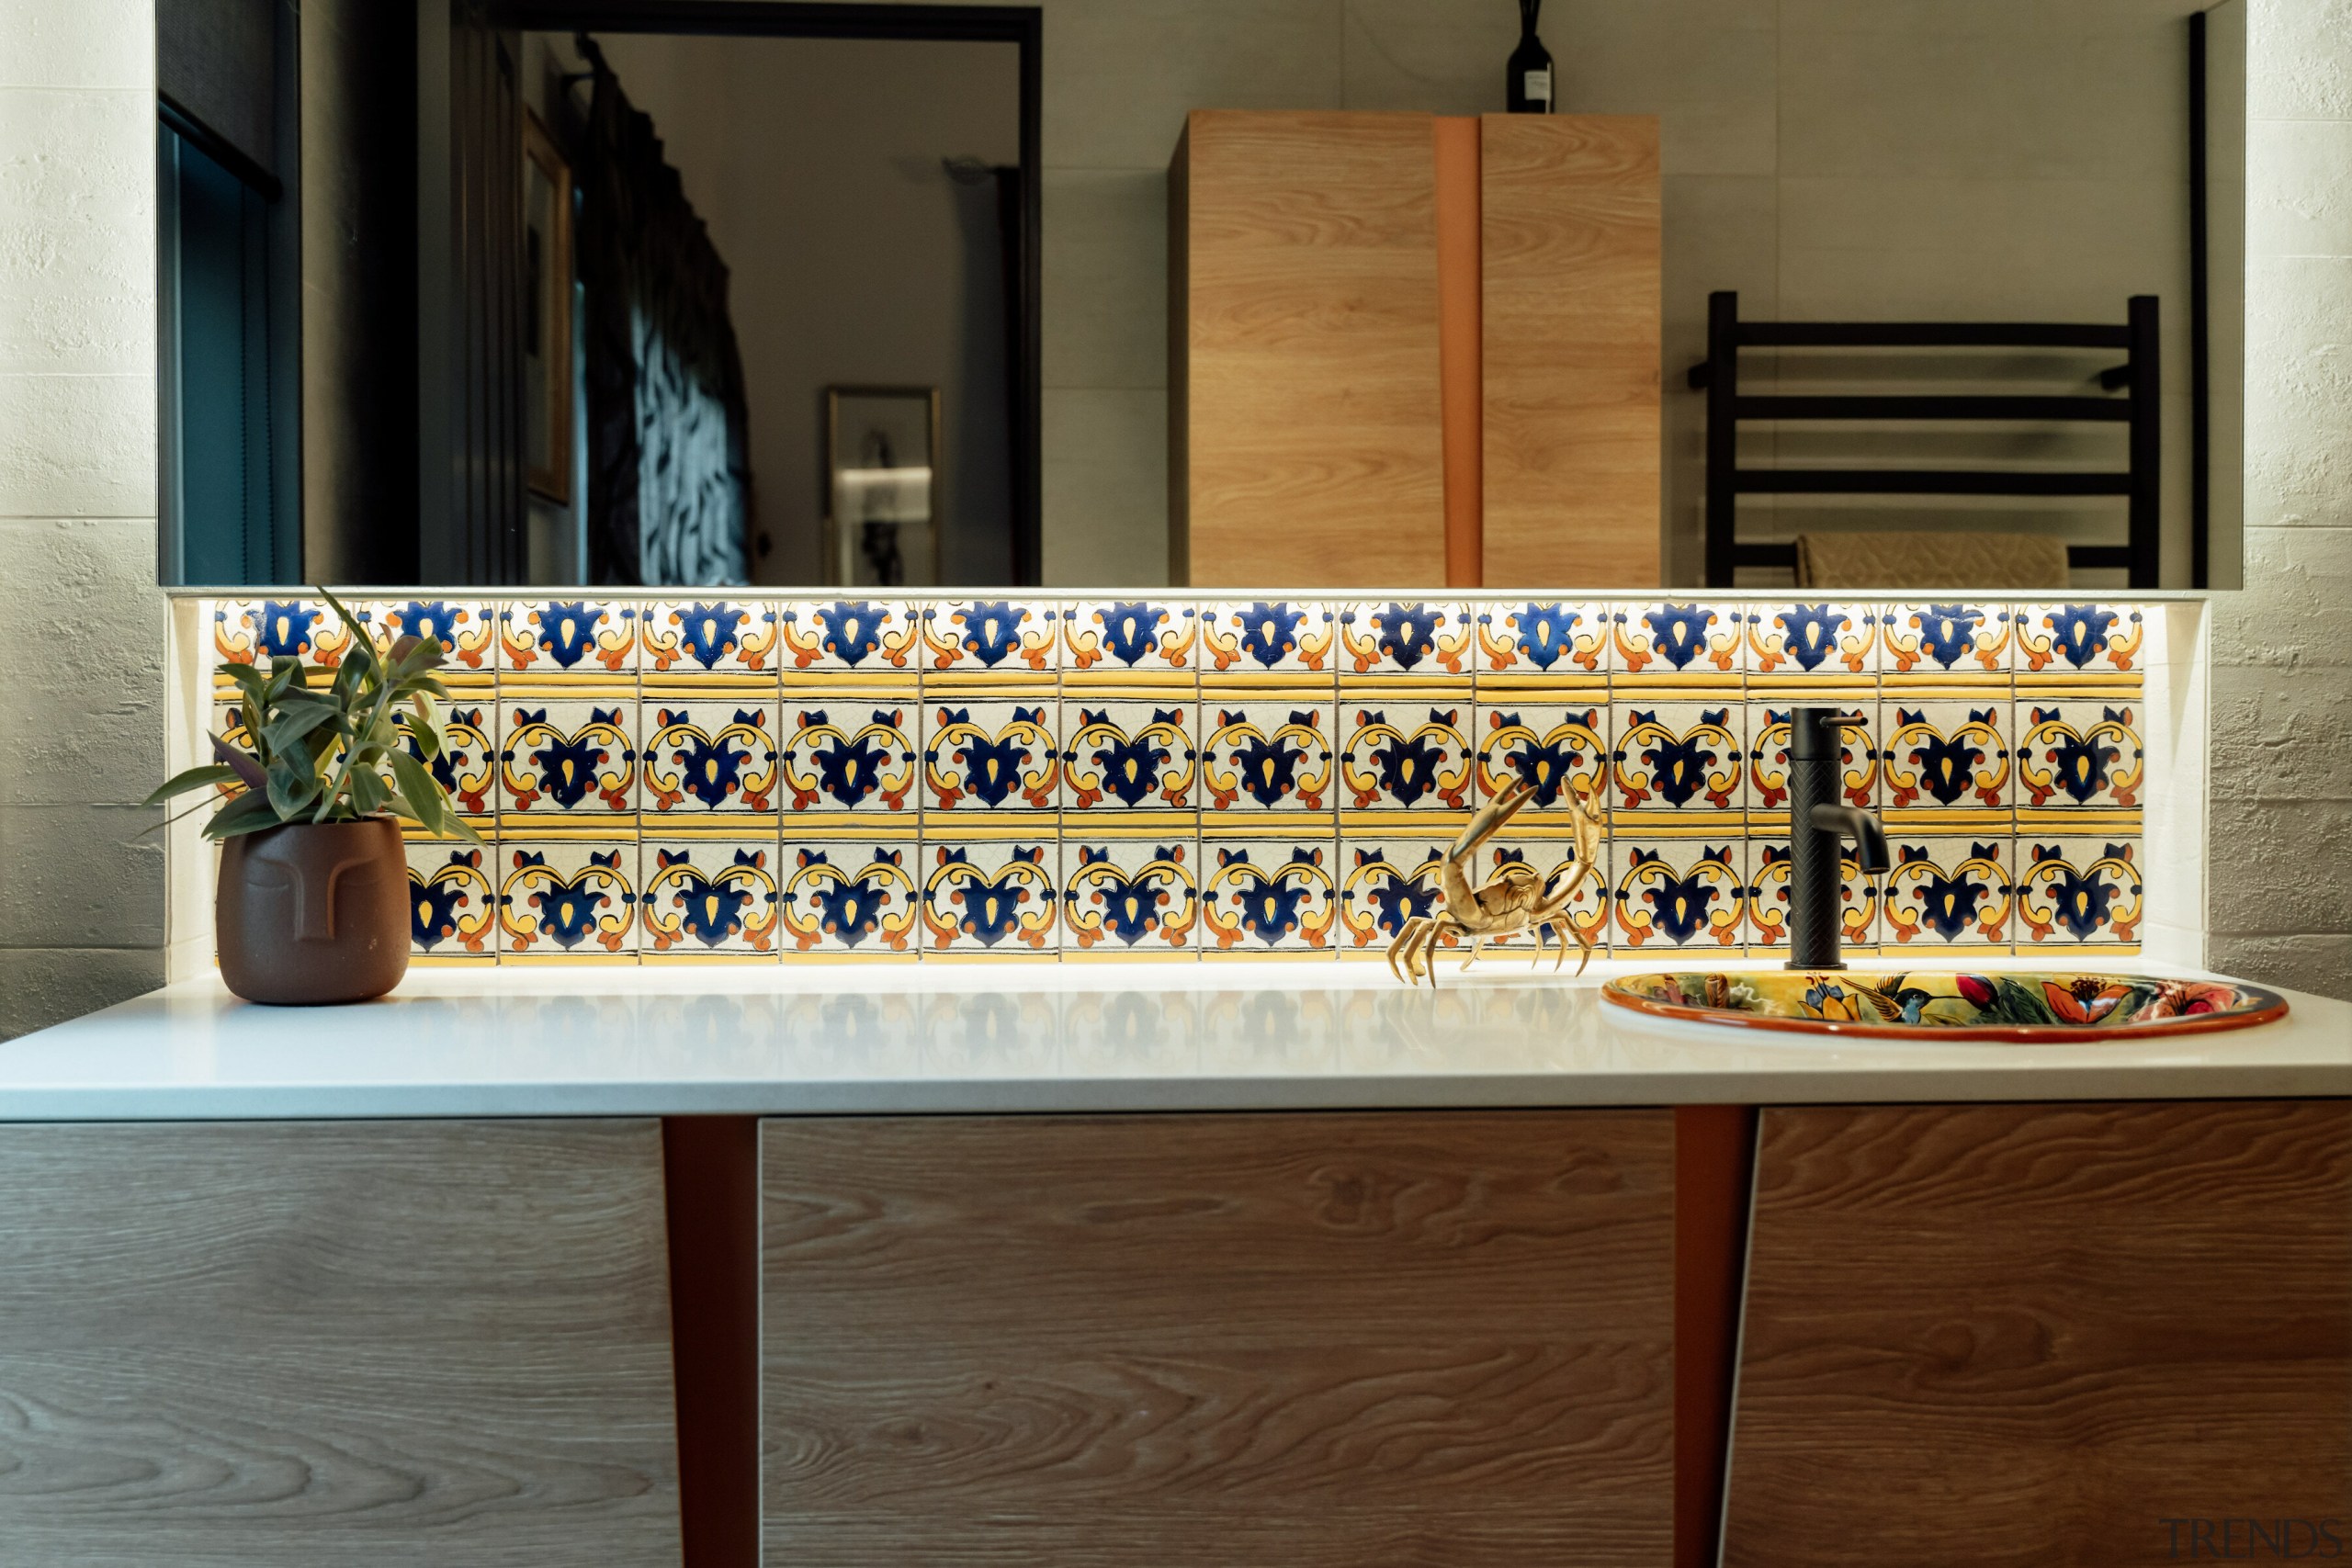 The feature tiles make for a vibrant splashback. 